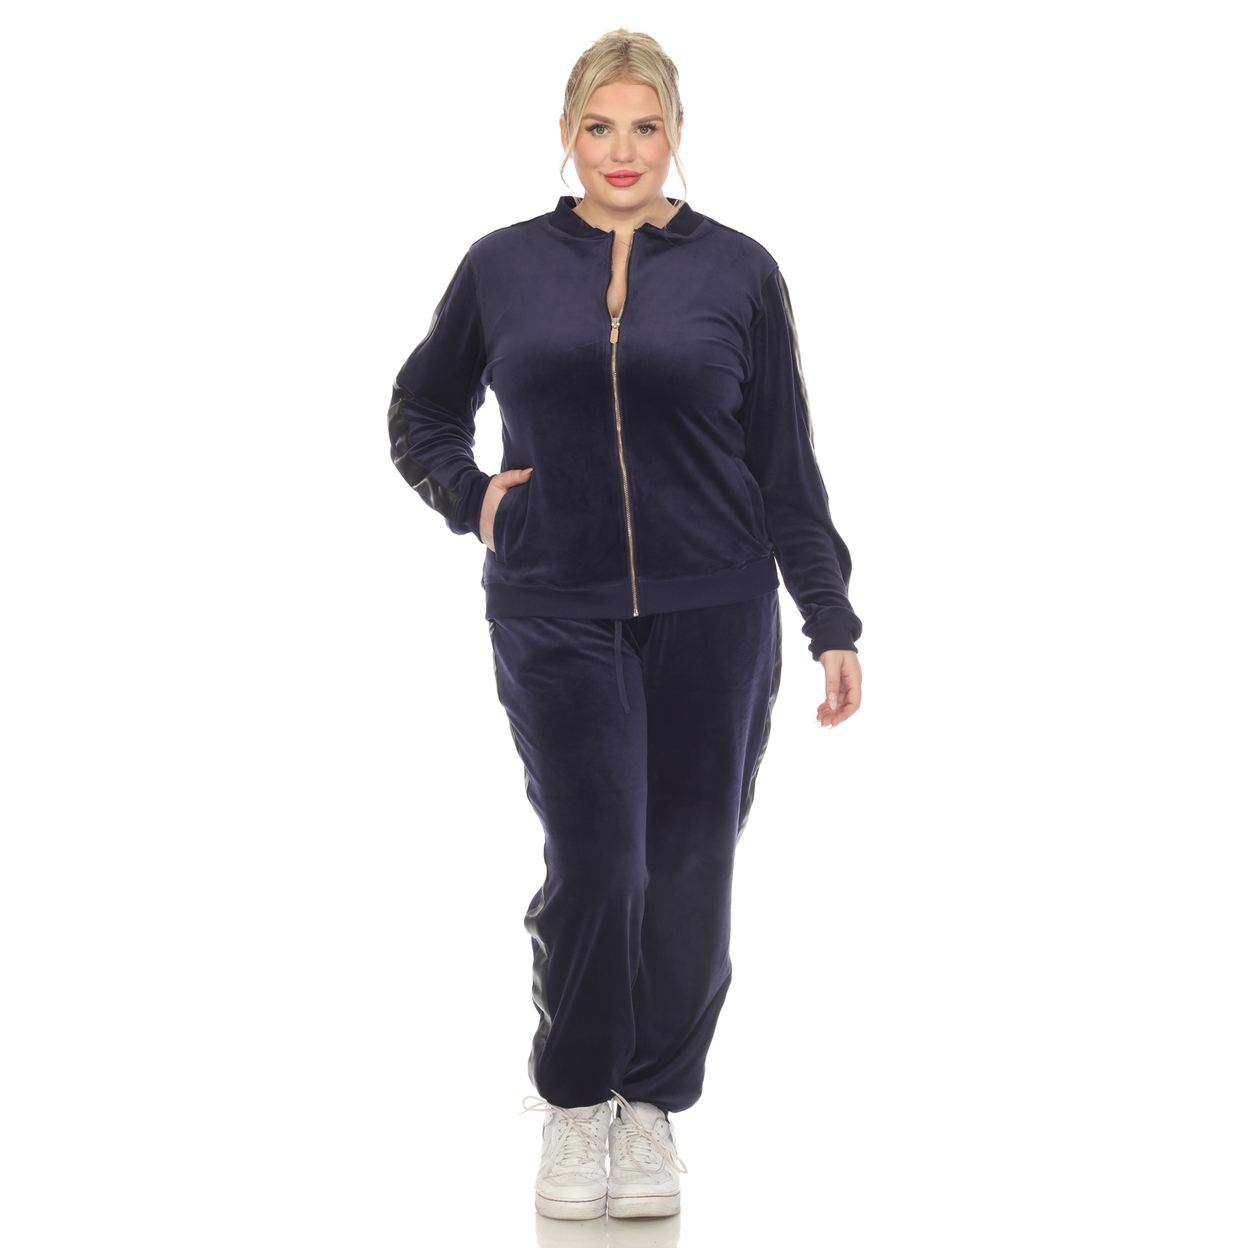 White Mark Women's 2-Piece Velour Tracksuit Set With Faux Leather Stripe - Navy, 2x